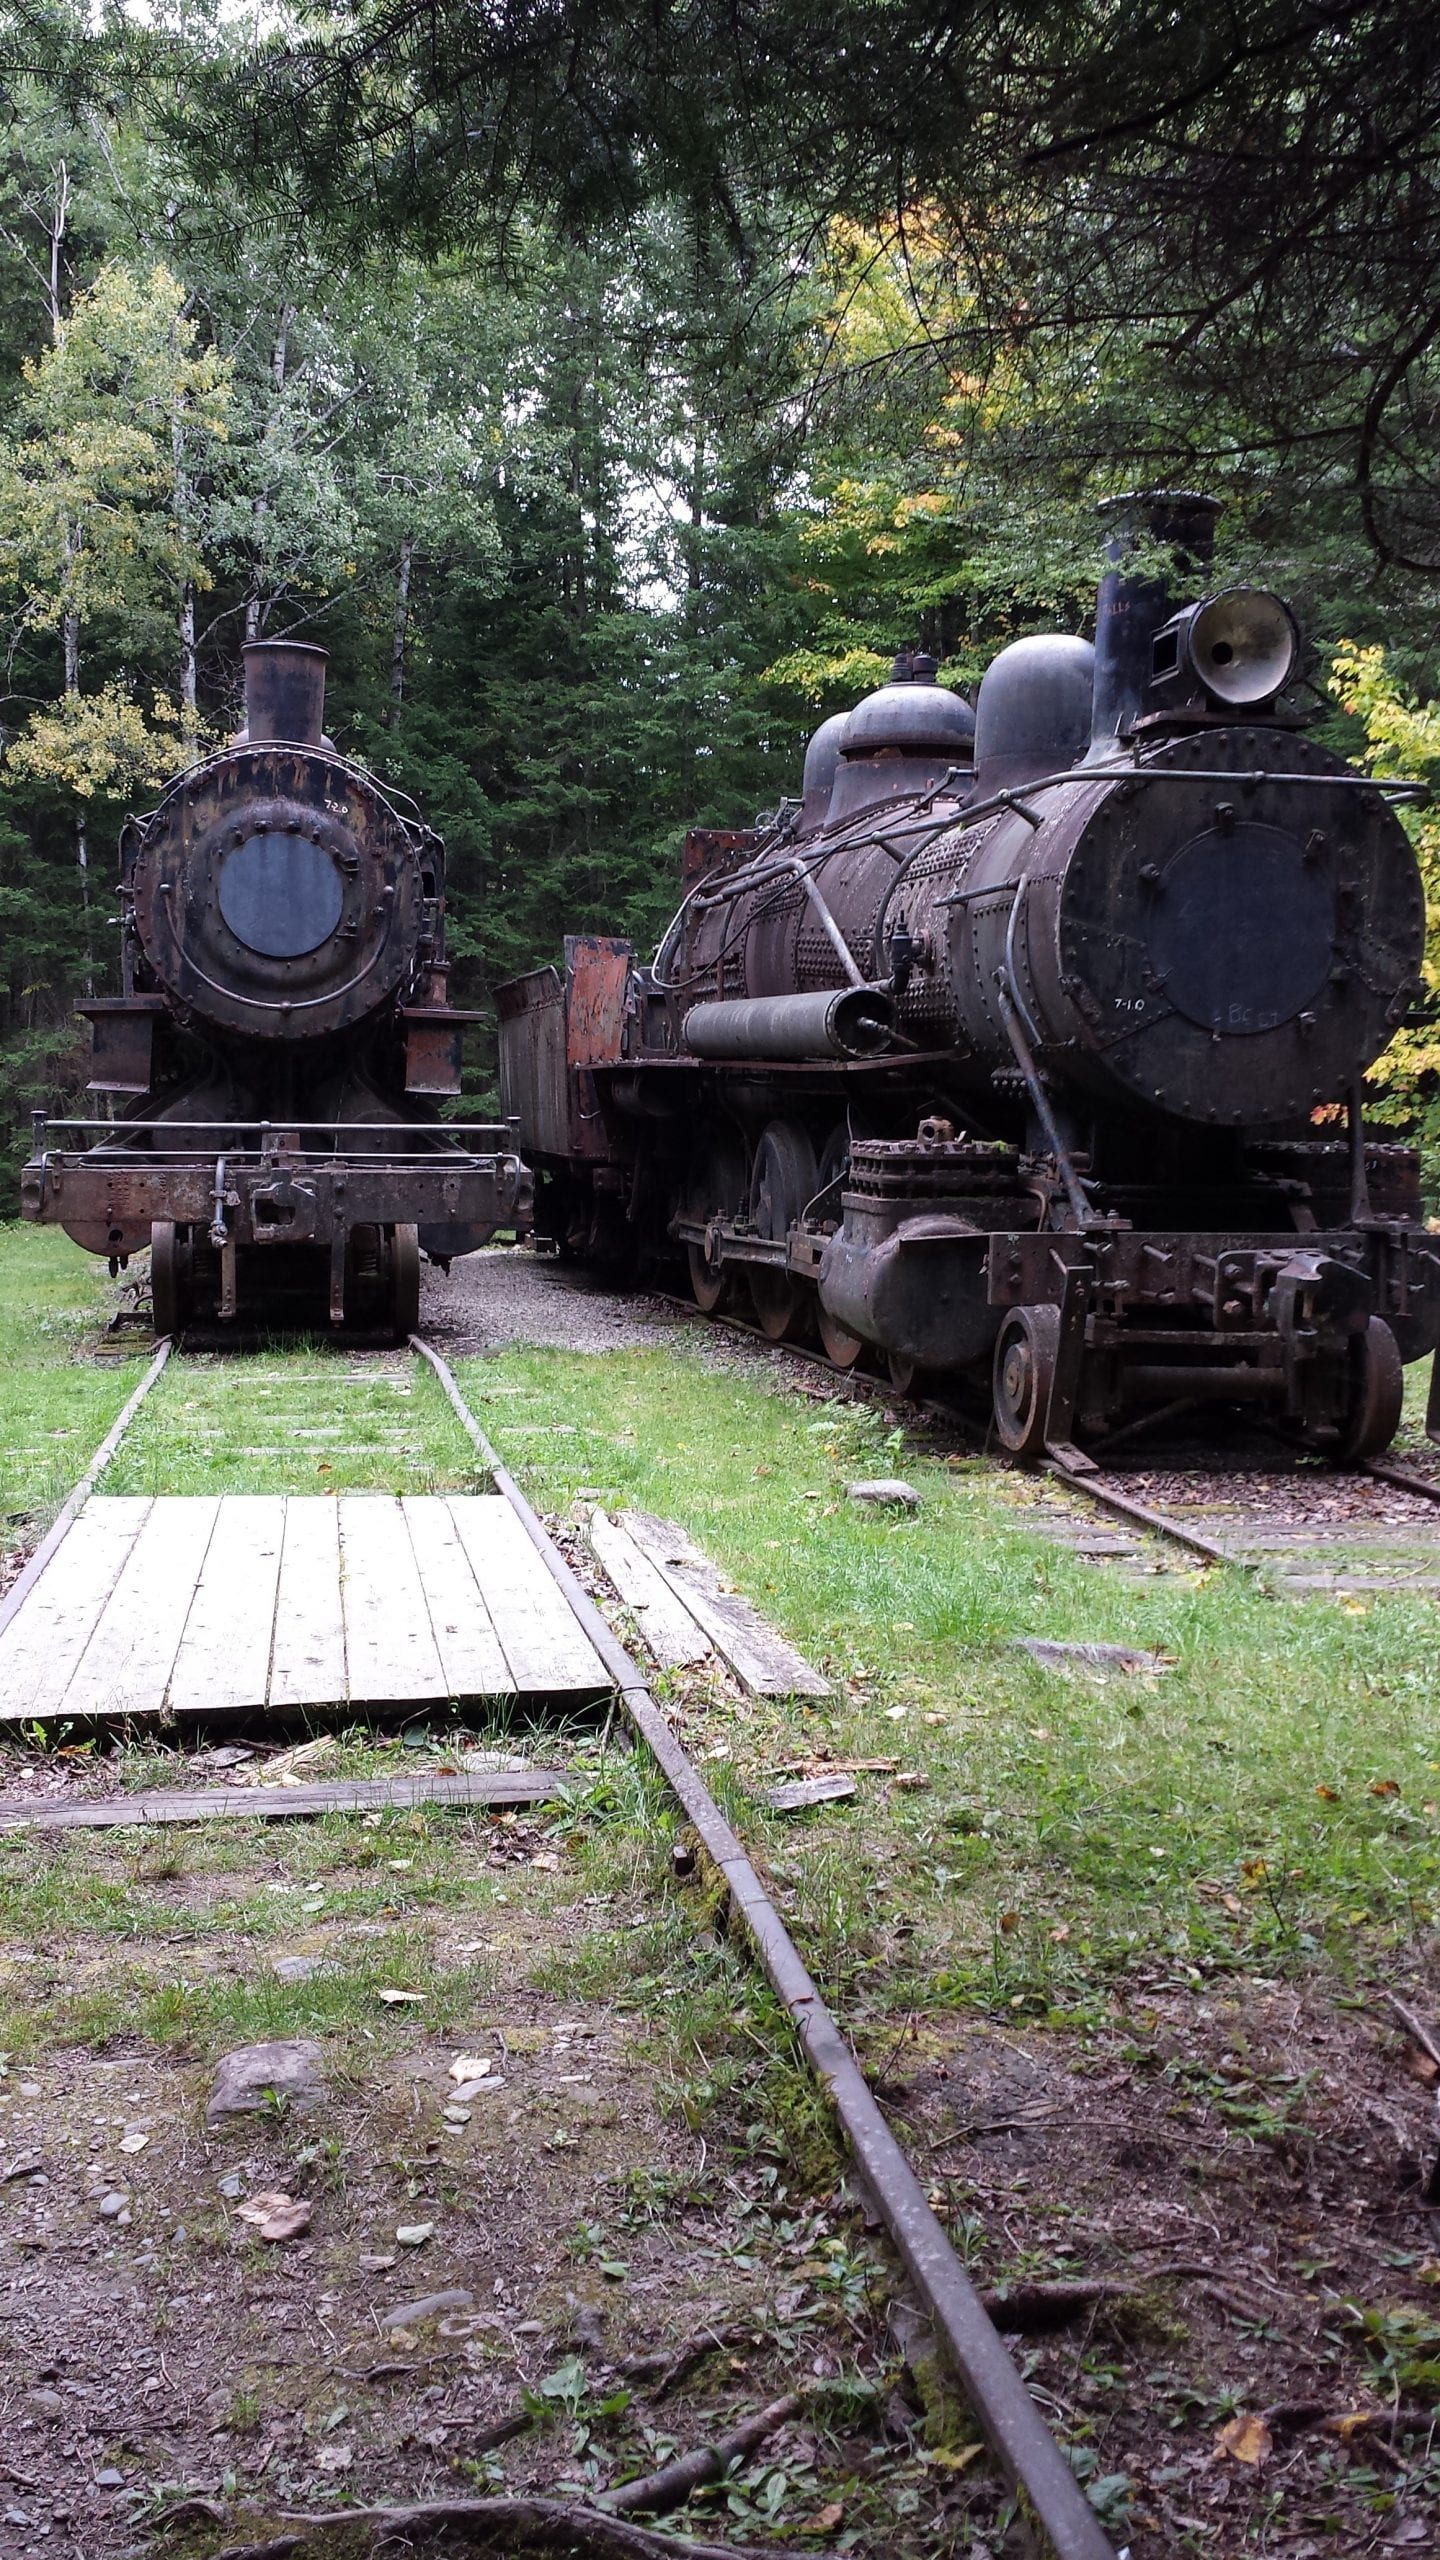 Find the Abandoned Locomotives in the North Maine Woods